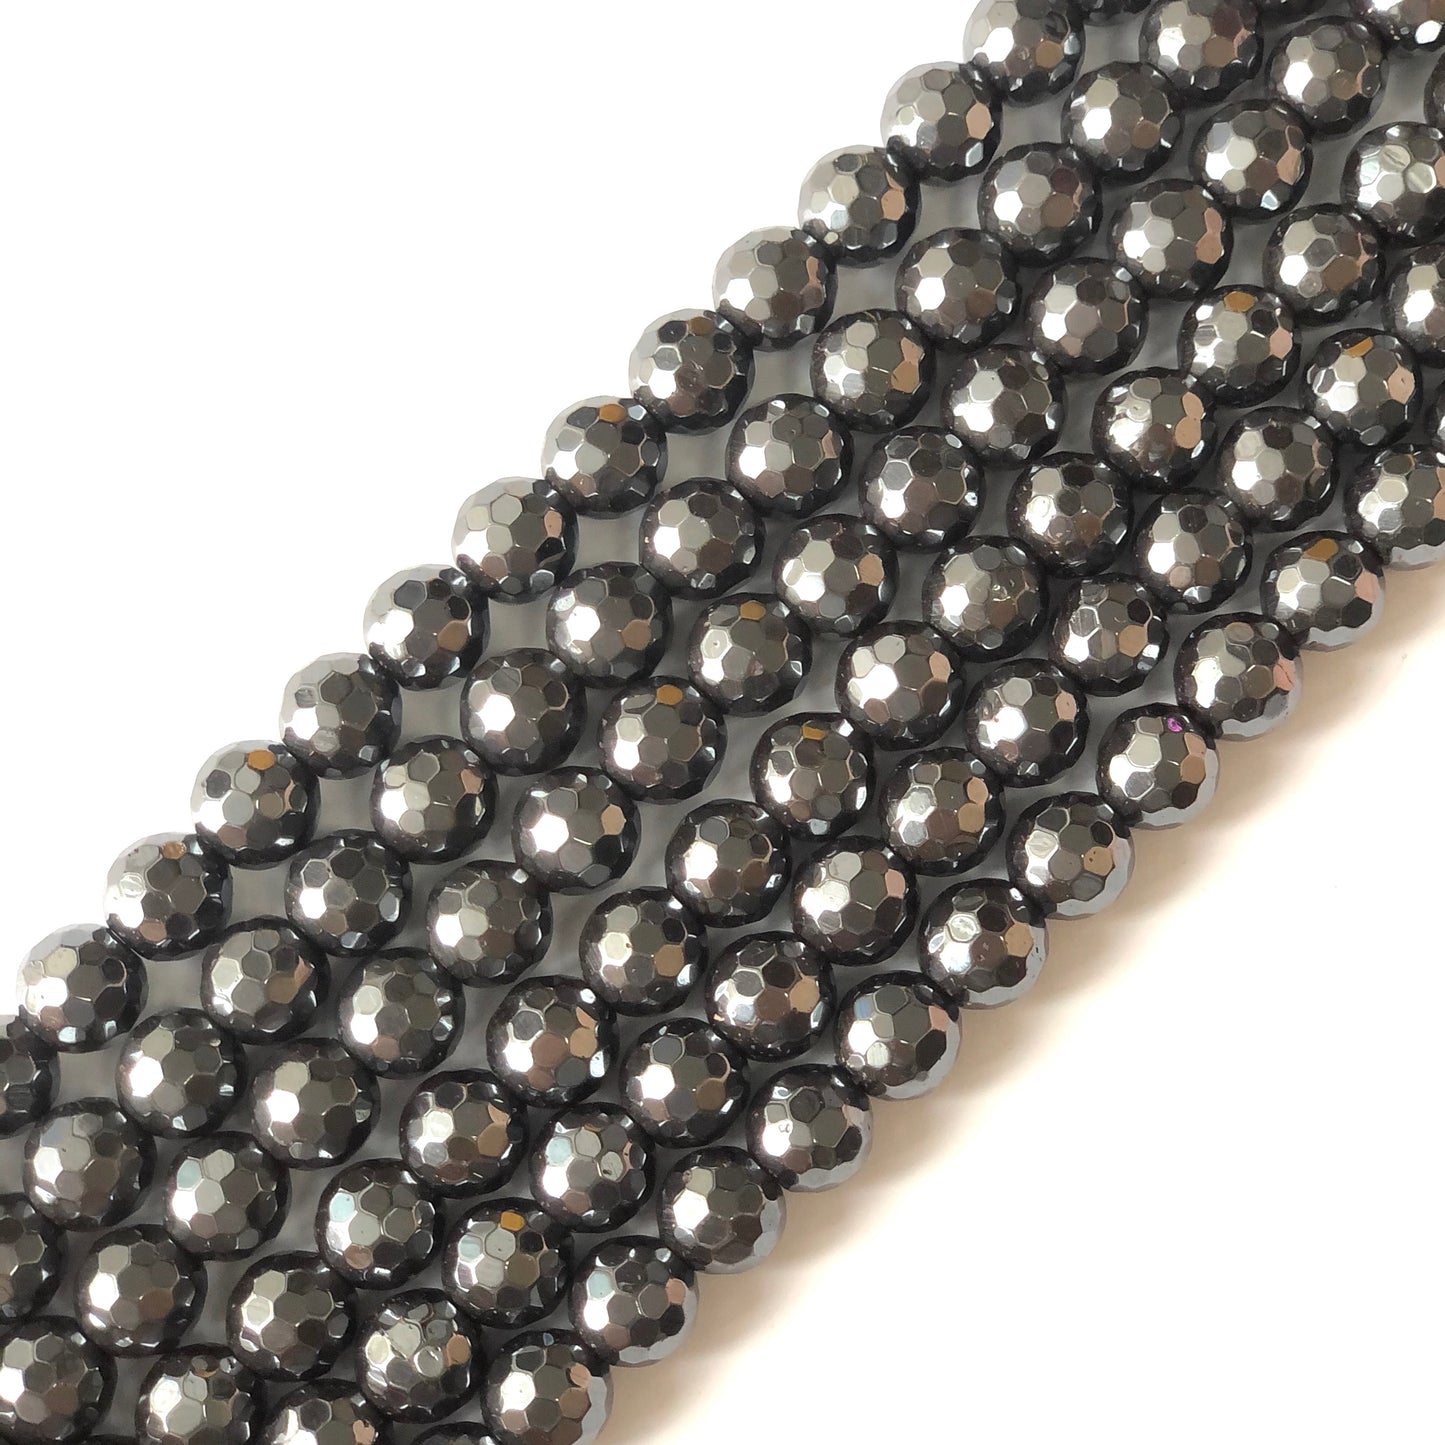 2 Strands/lot 6, 8, 10mm Gunmetal Hematite Faceted Beads Stone Beads 6mm Stone Beads 8mm Stone Beads Hematite Beads Charms Beads Beyond